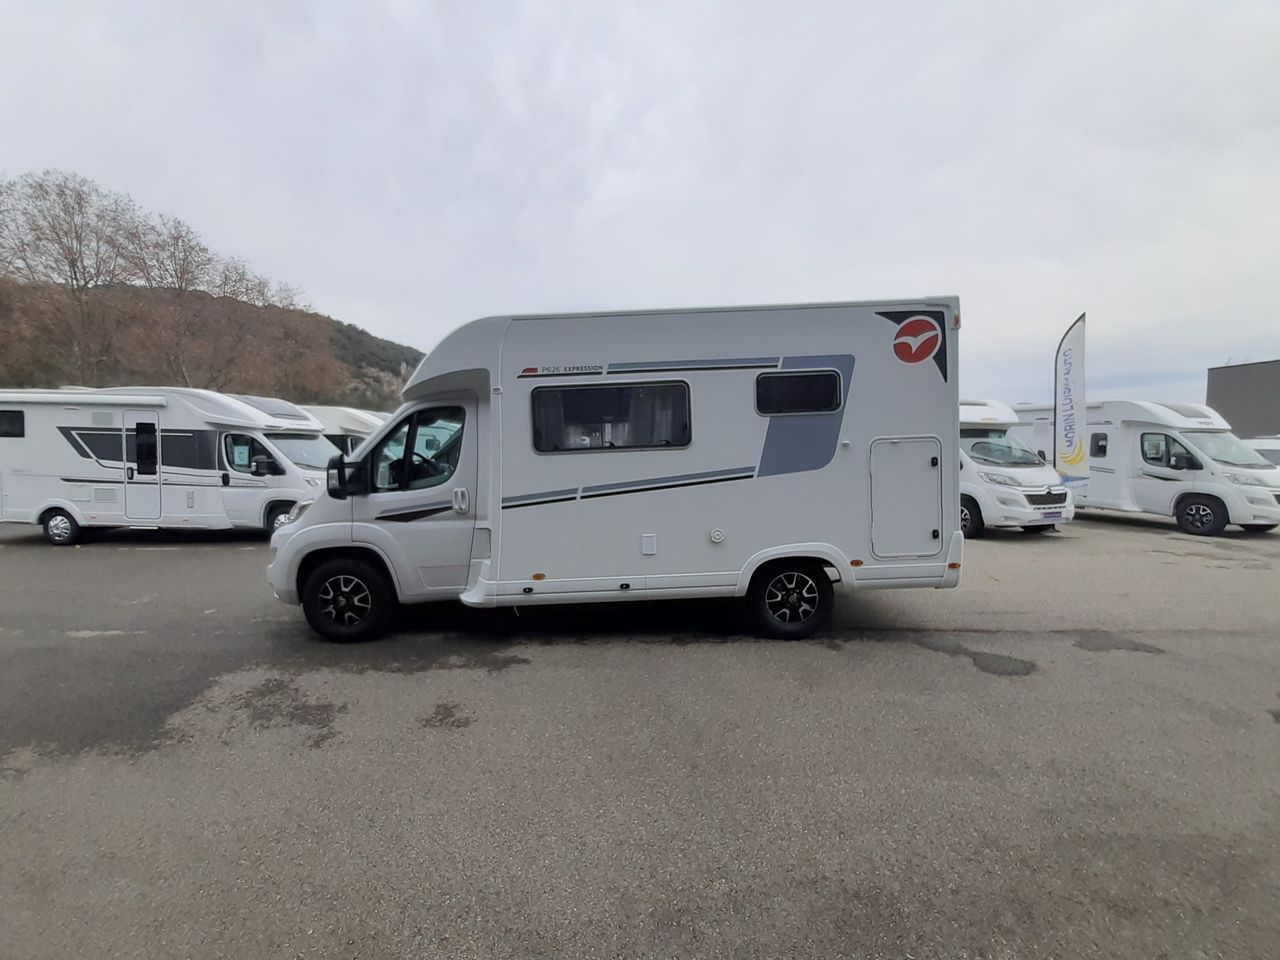 Camping-car - Pilote - P 626 D EXPRESSION - 2023